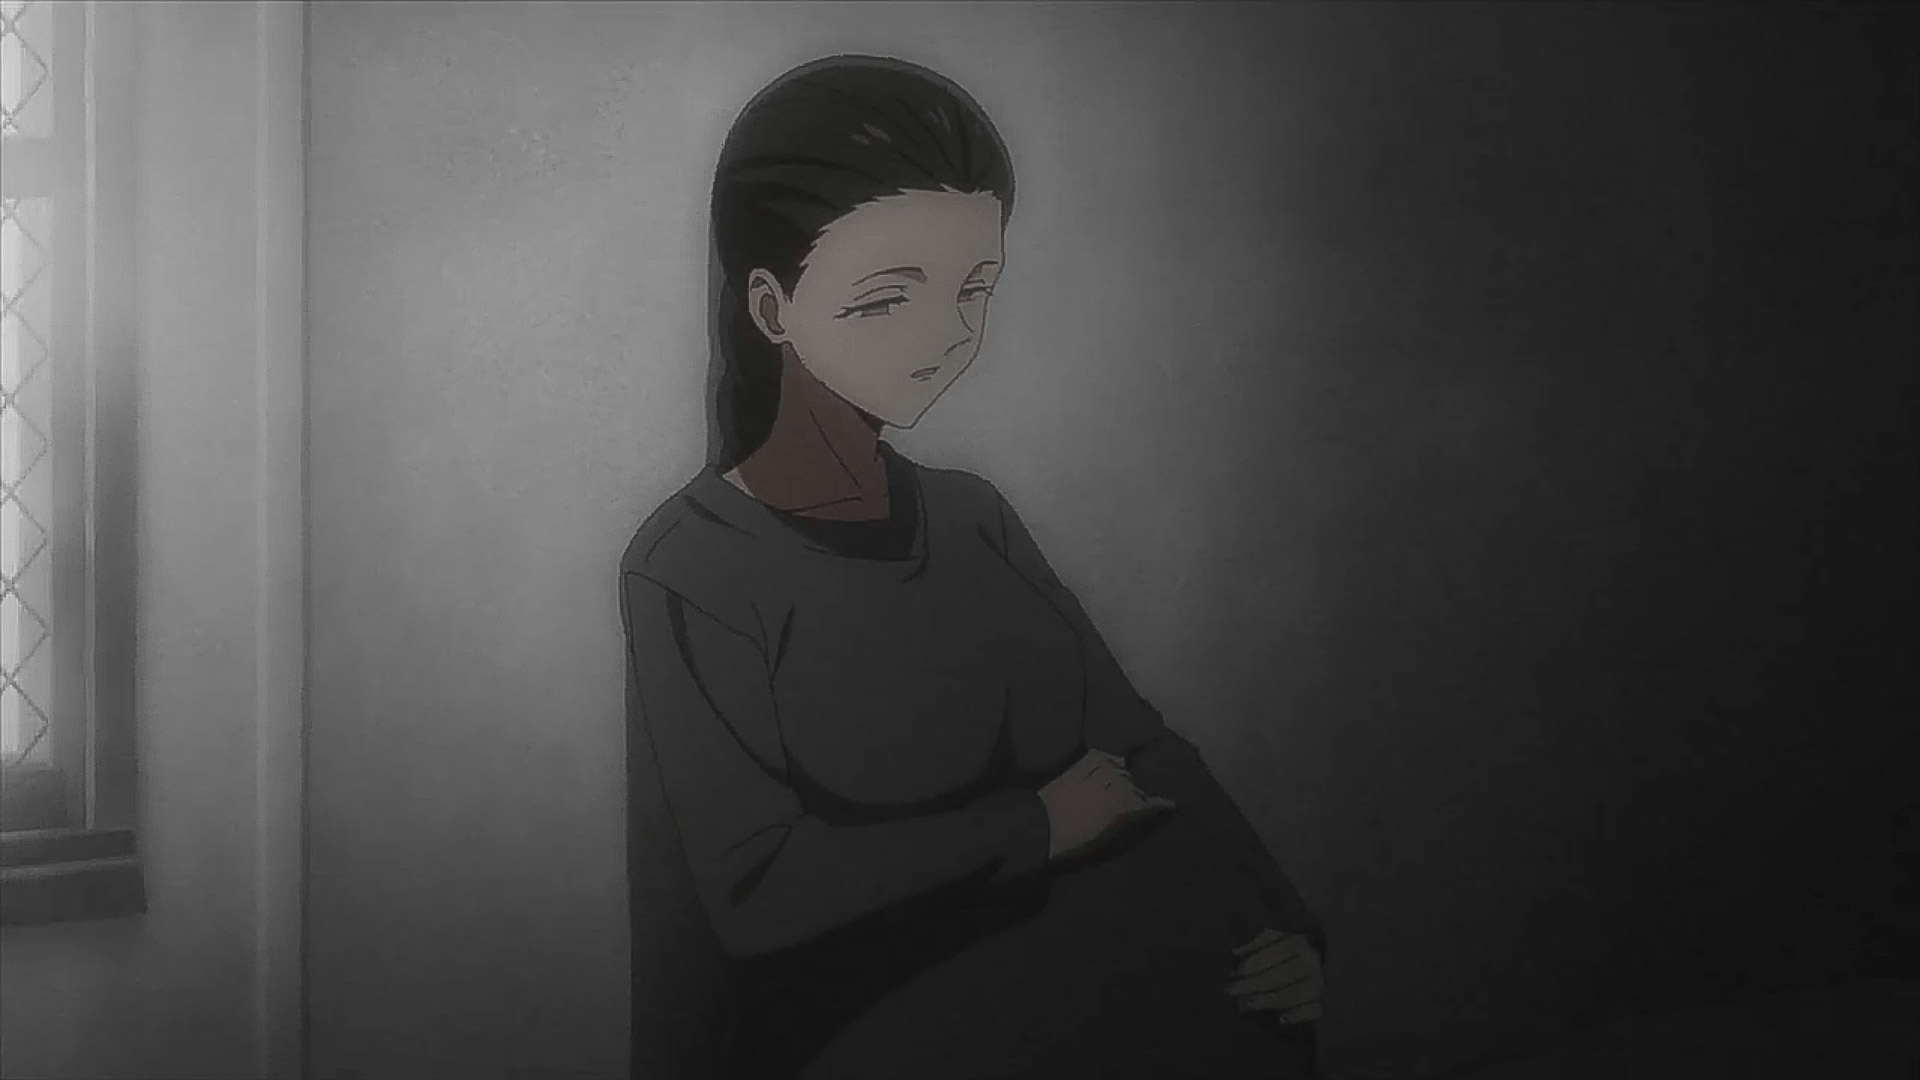 Isabella. The Promised Neverland